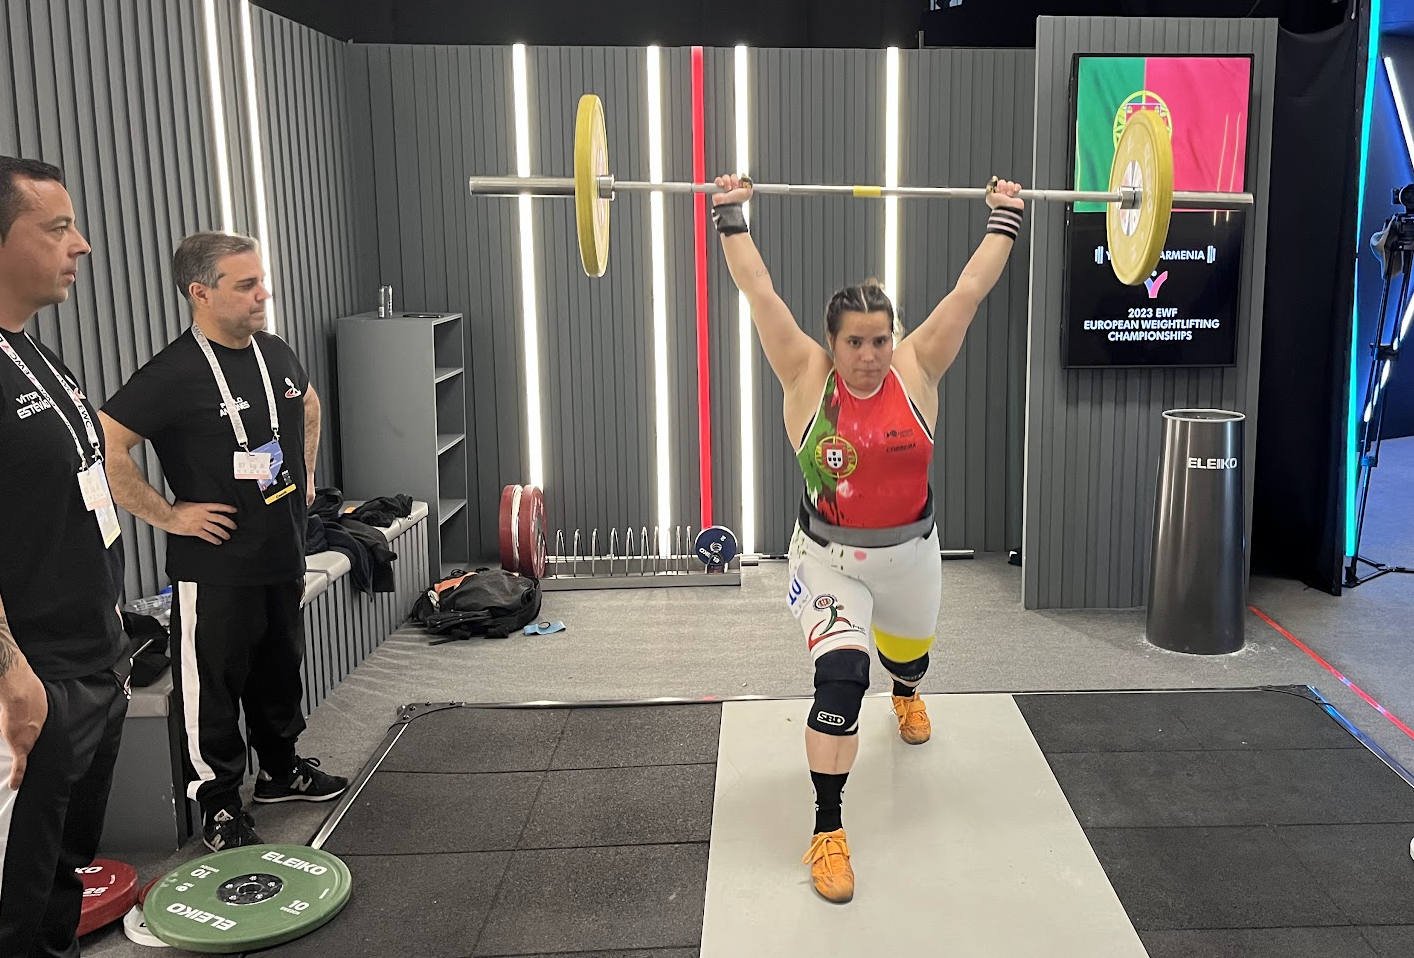 Fourth-placed Jessica Almeida put in a good performance for Portugal given that, at 29, she had never lifted in an international competition before ©Brian Oliver